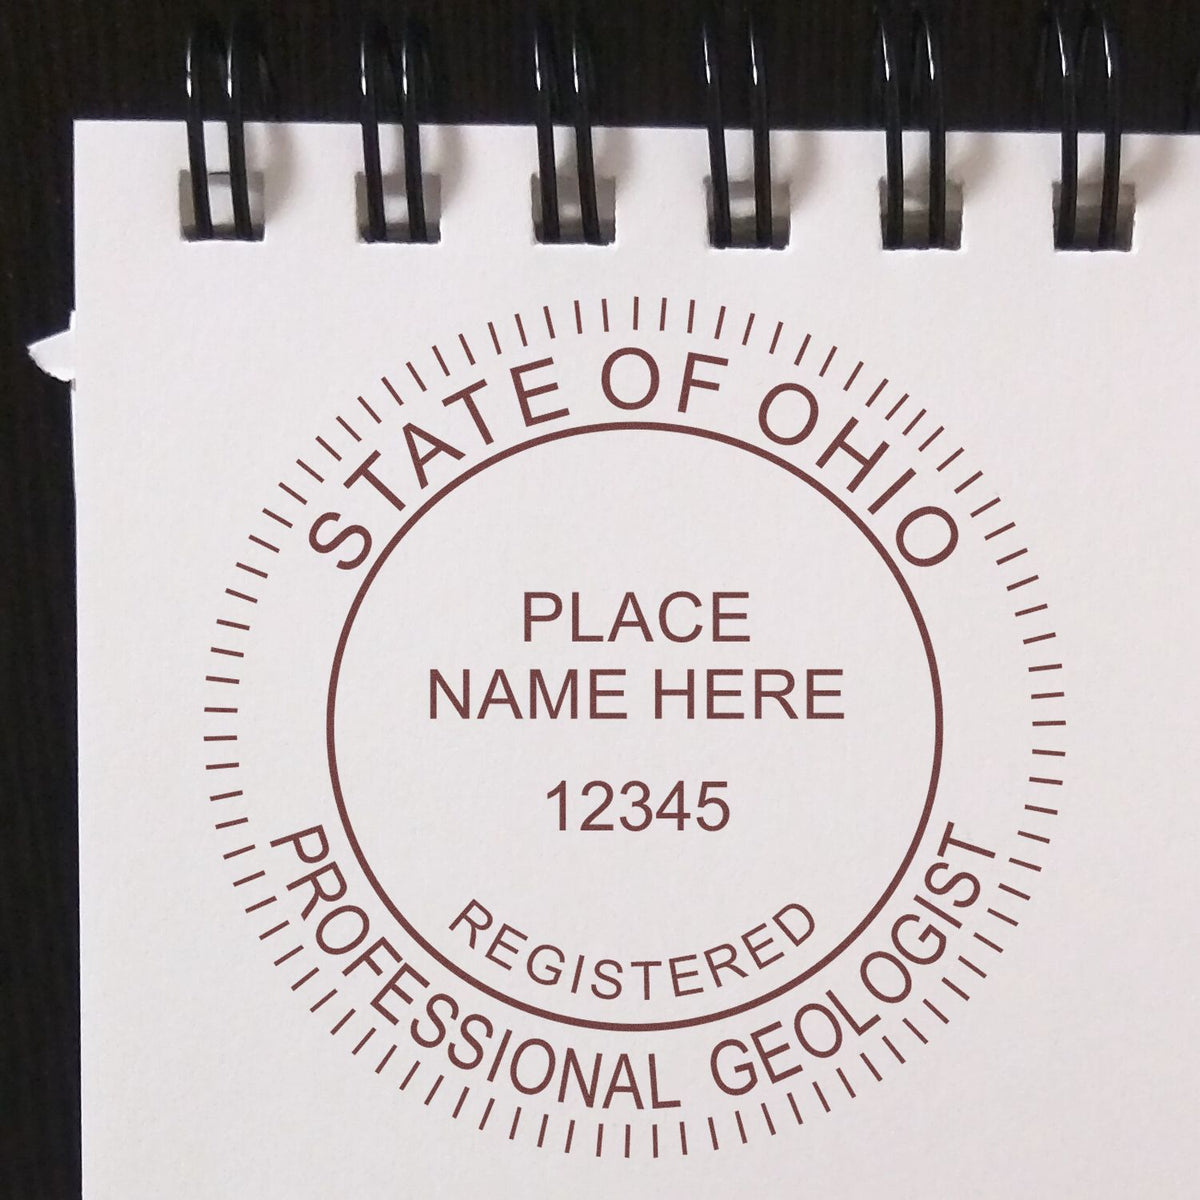 The Self-Inking Ohio Geologist Stamp stamp impression comes to life with a crisp, detailed image stamped on paper - showcasing true professional quality.